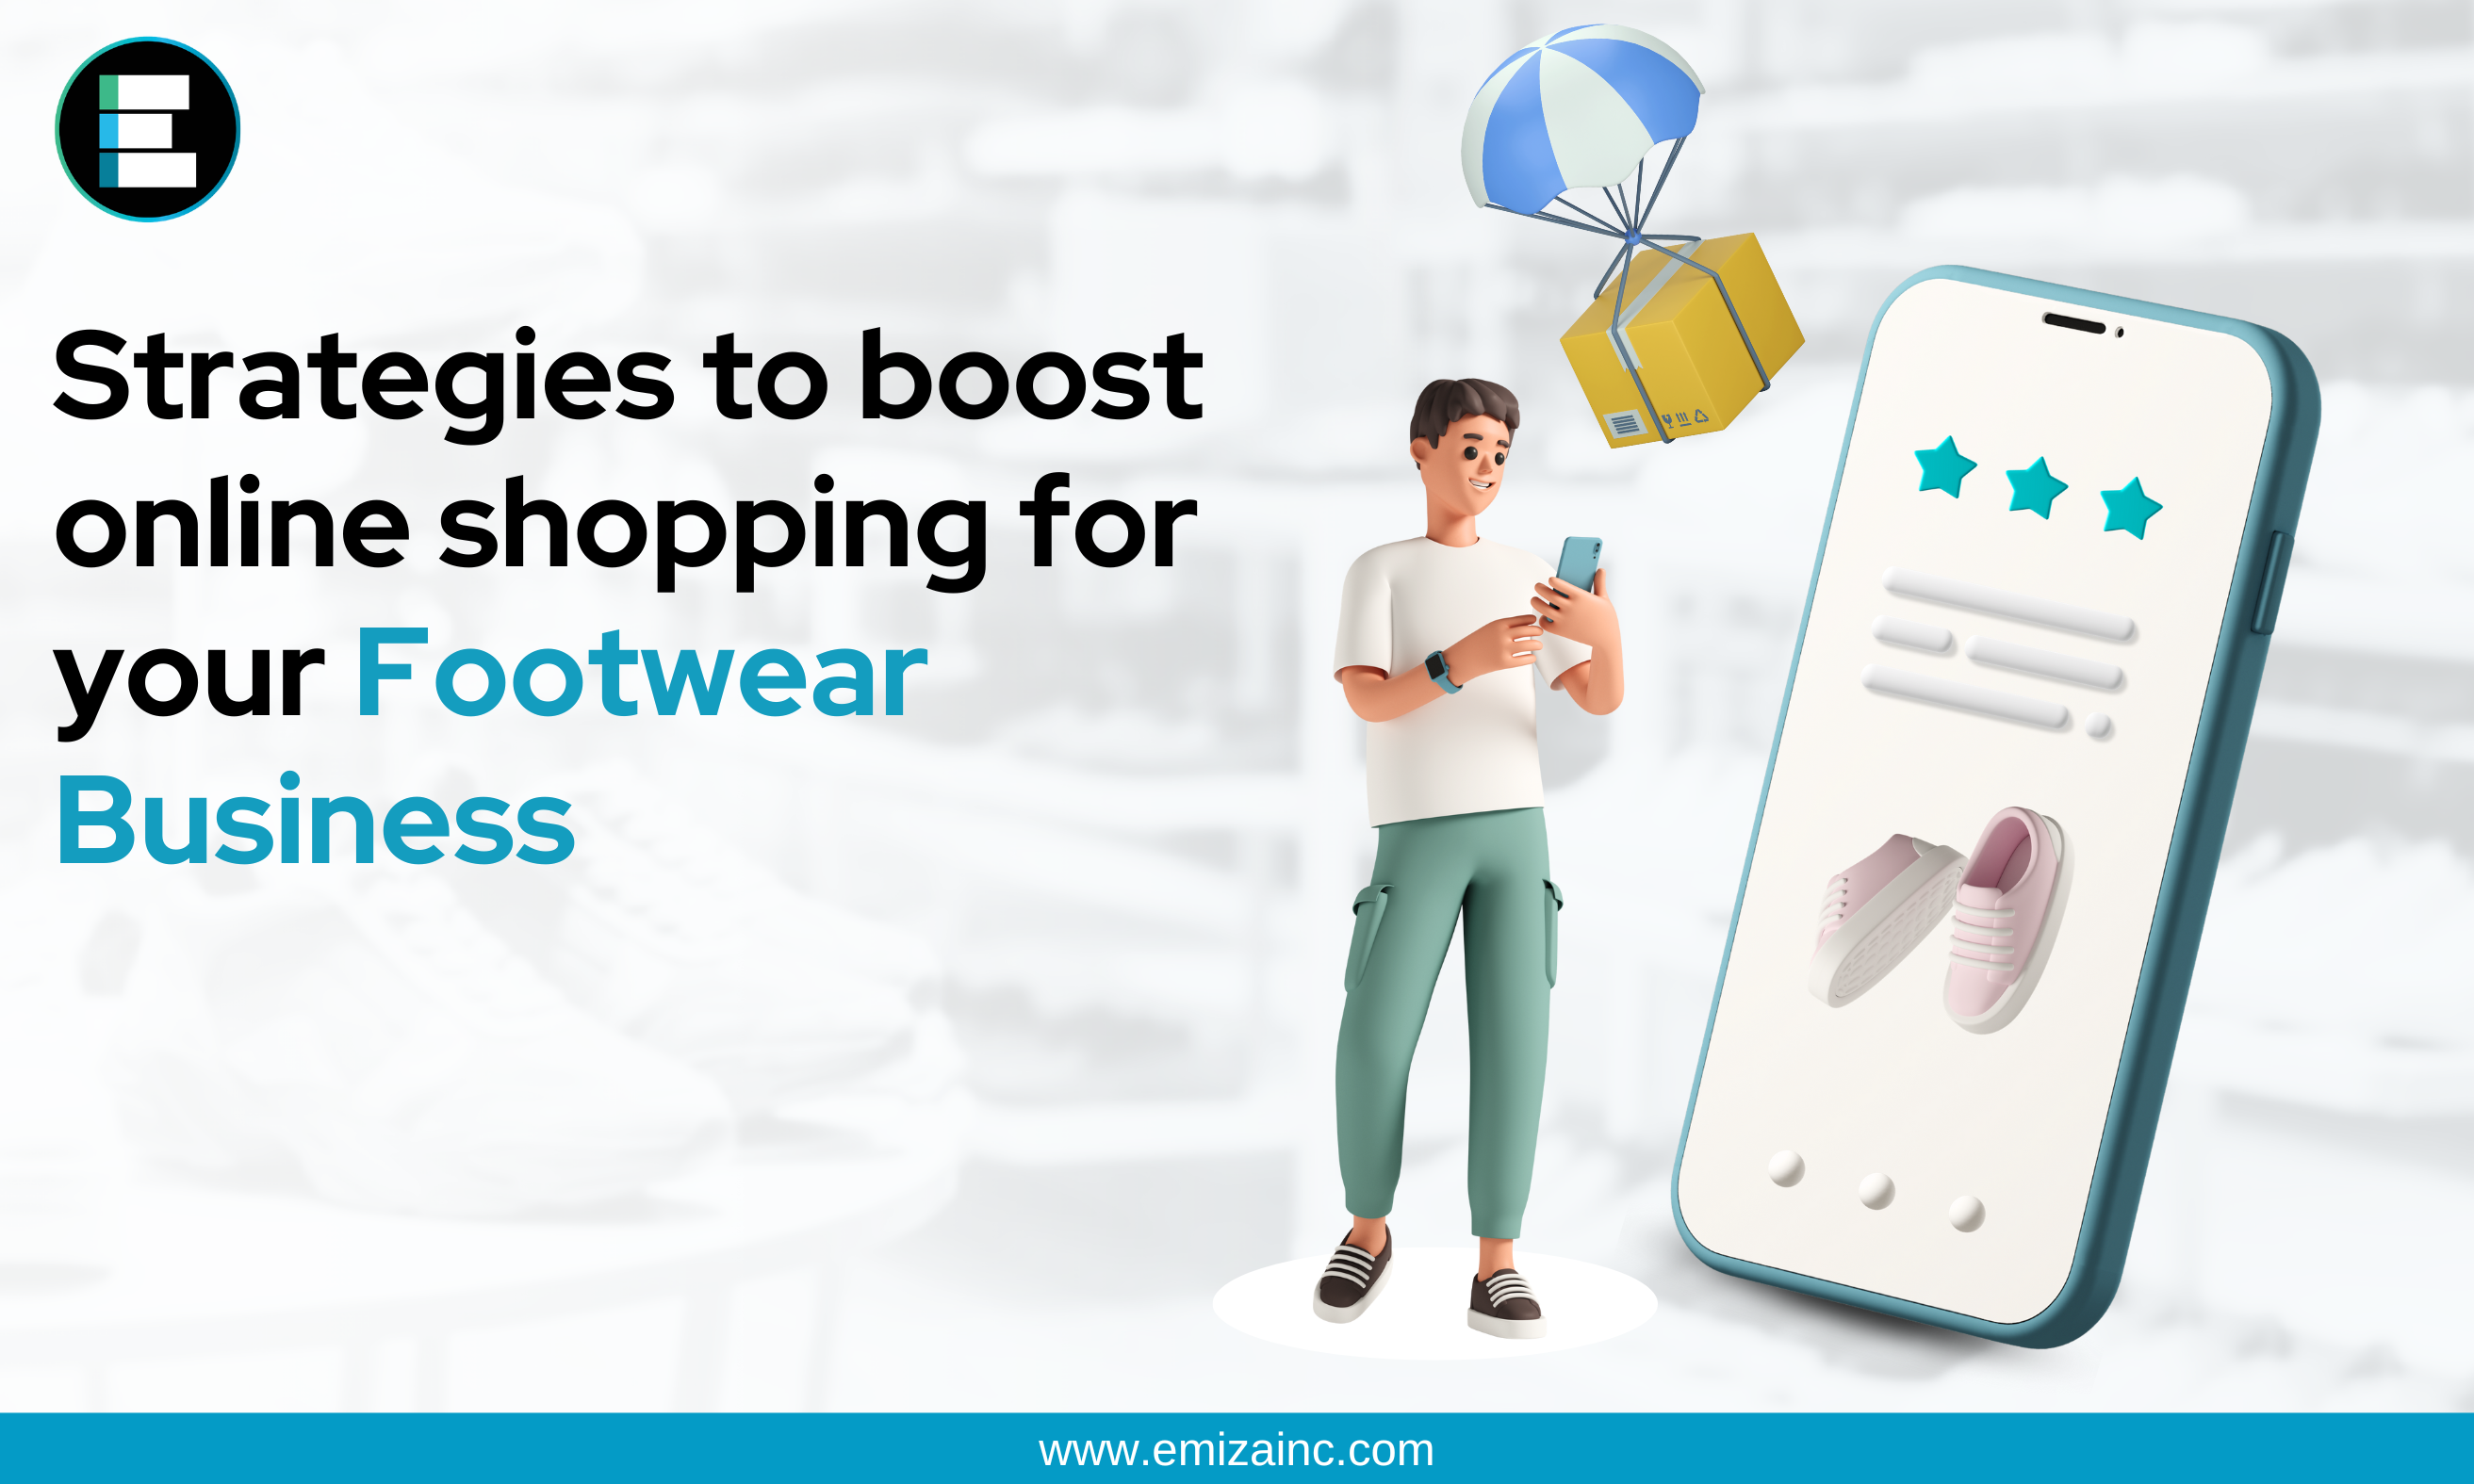 Strategies to Boost Online Shopping For Your Footwear Business